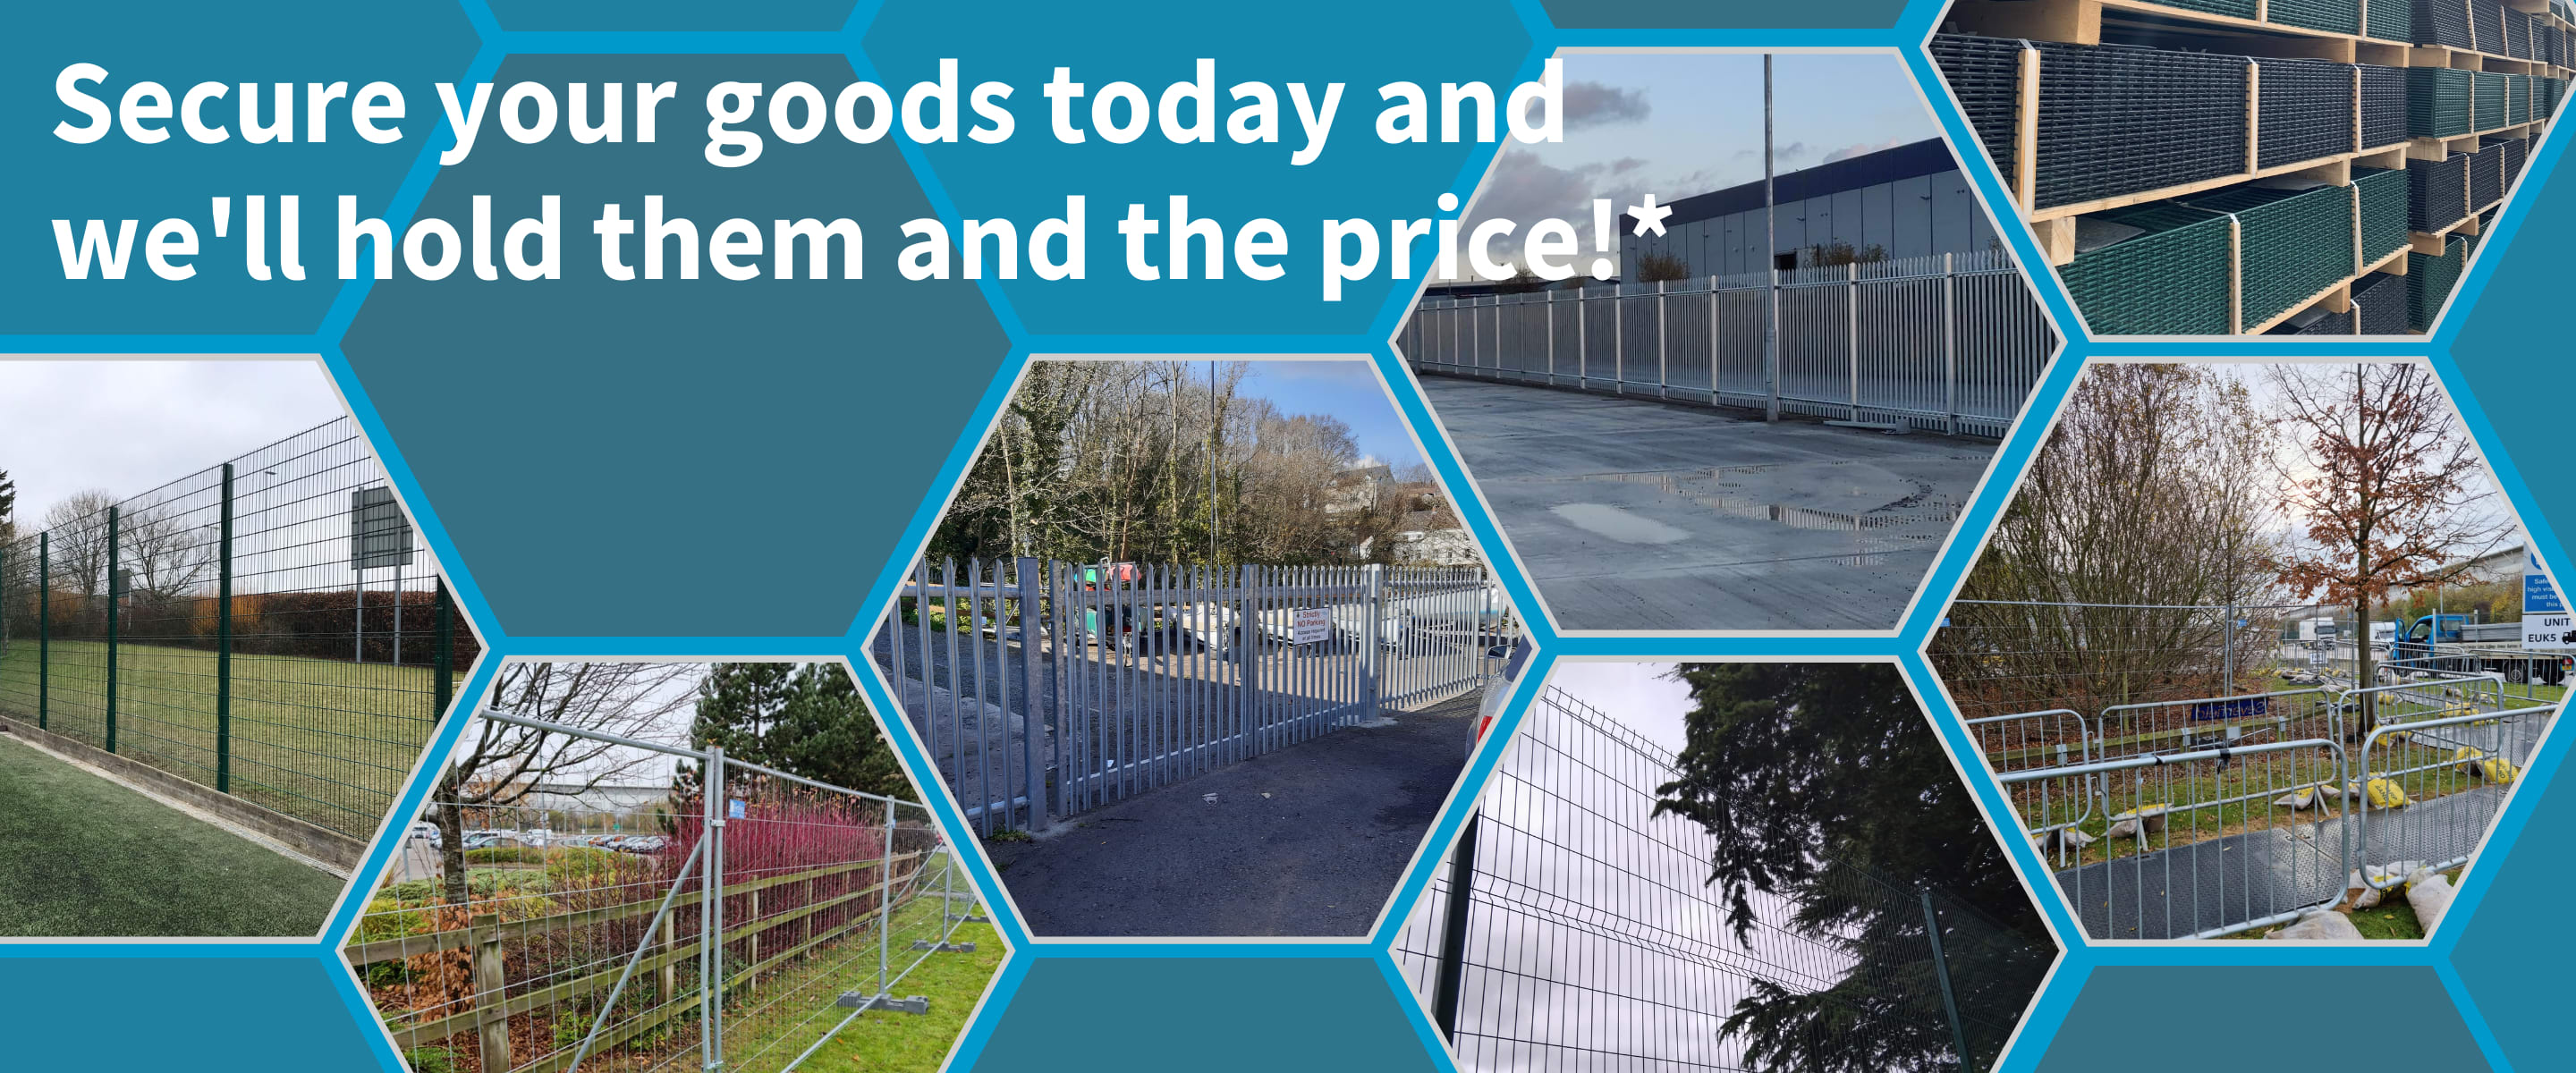 Secure your goods today and we will hold them for up to 3 months!